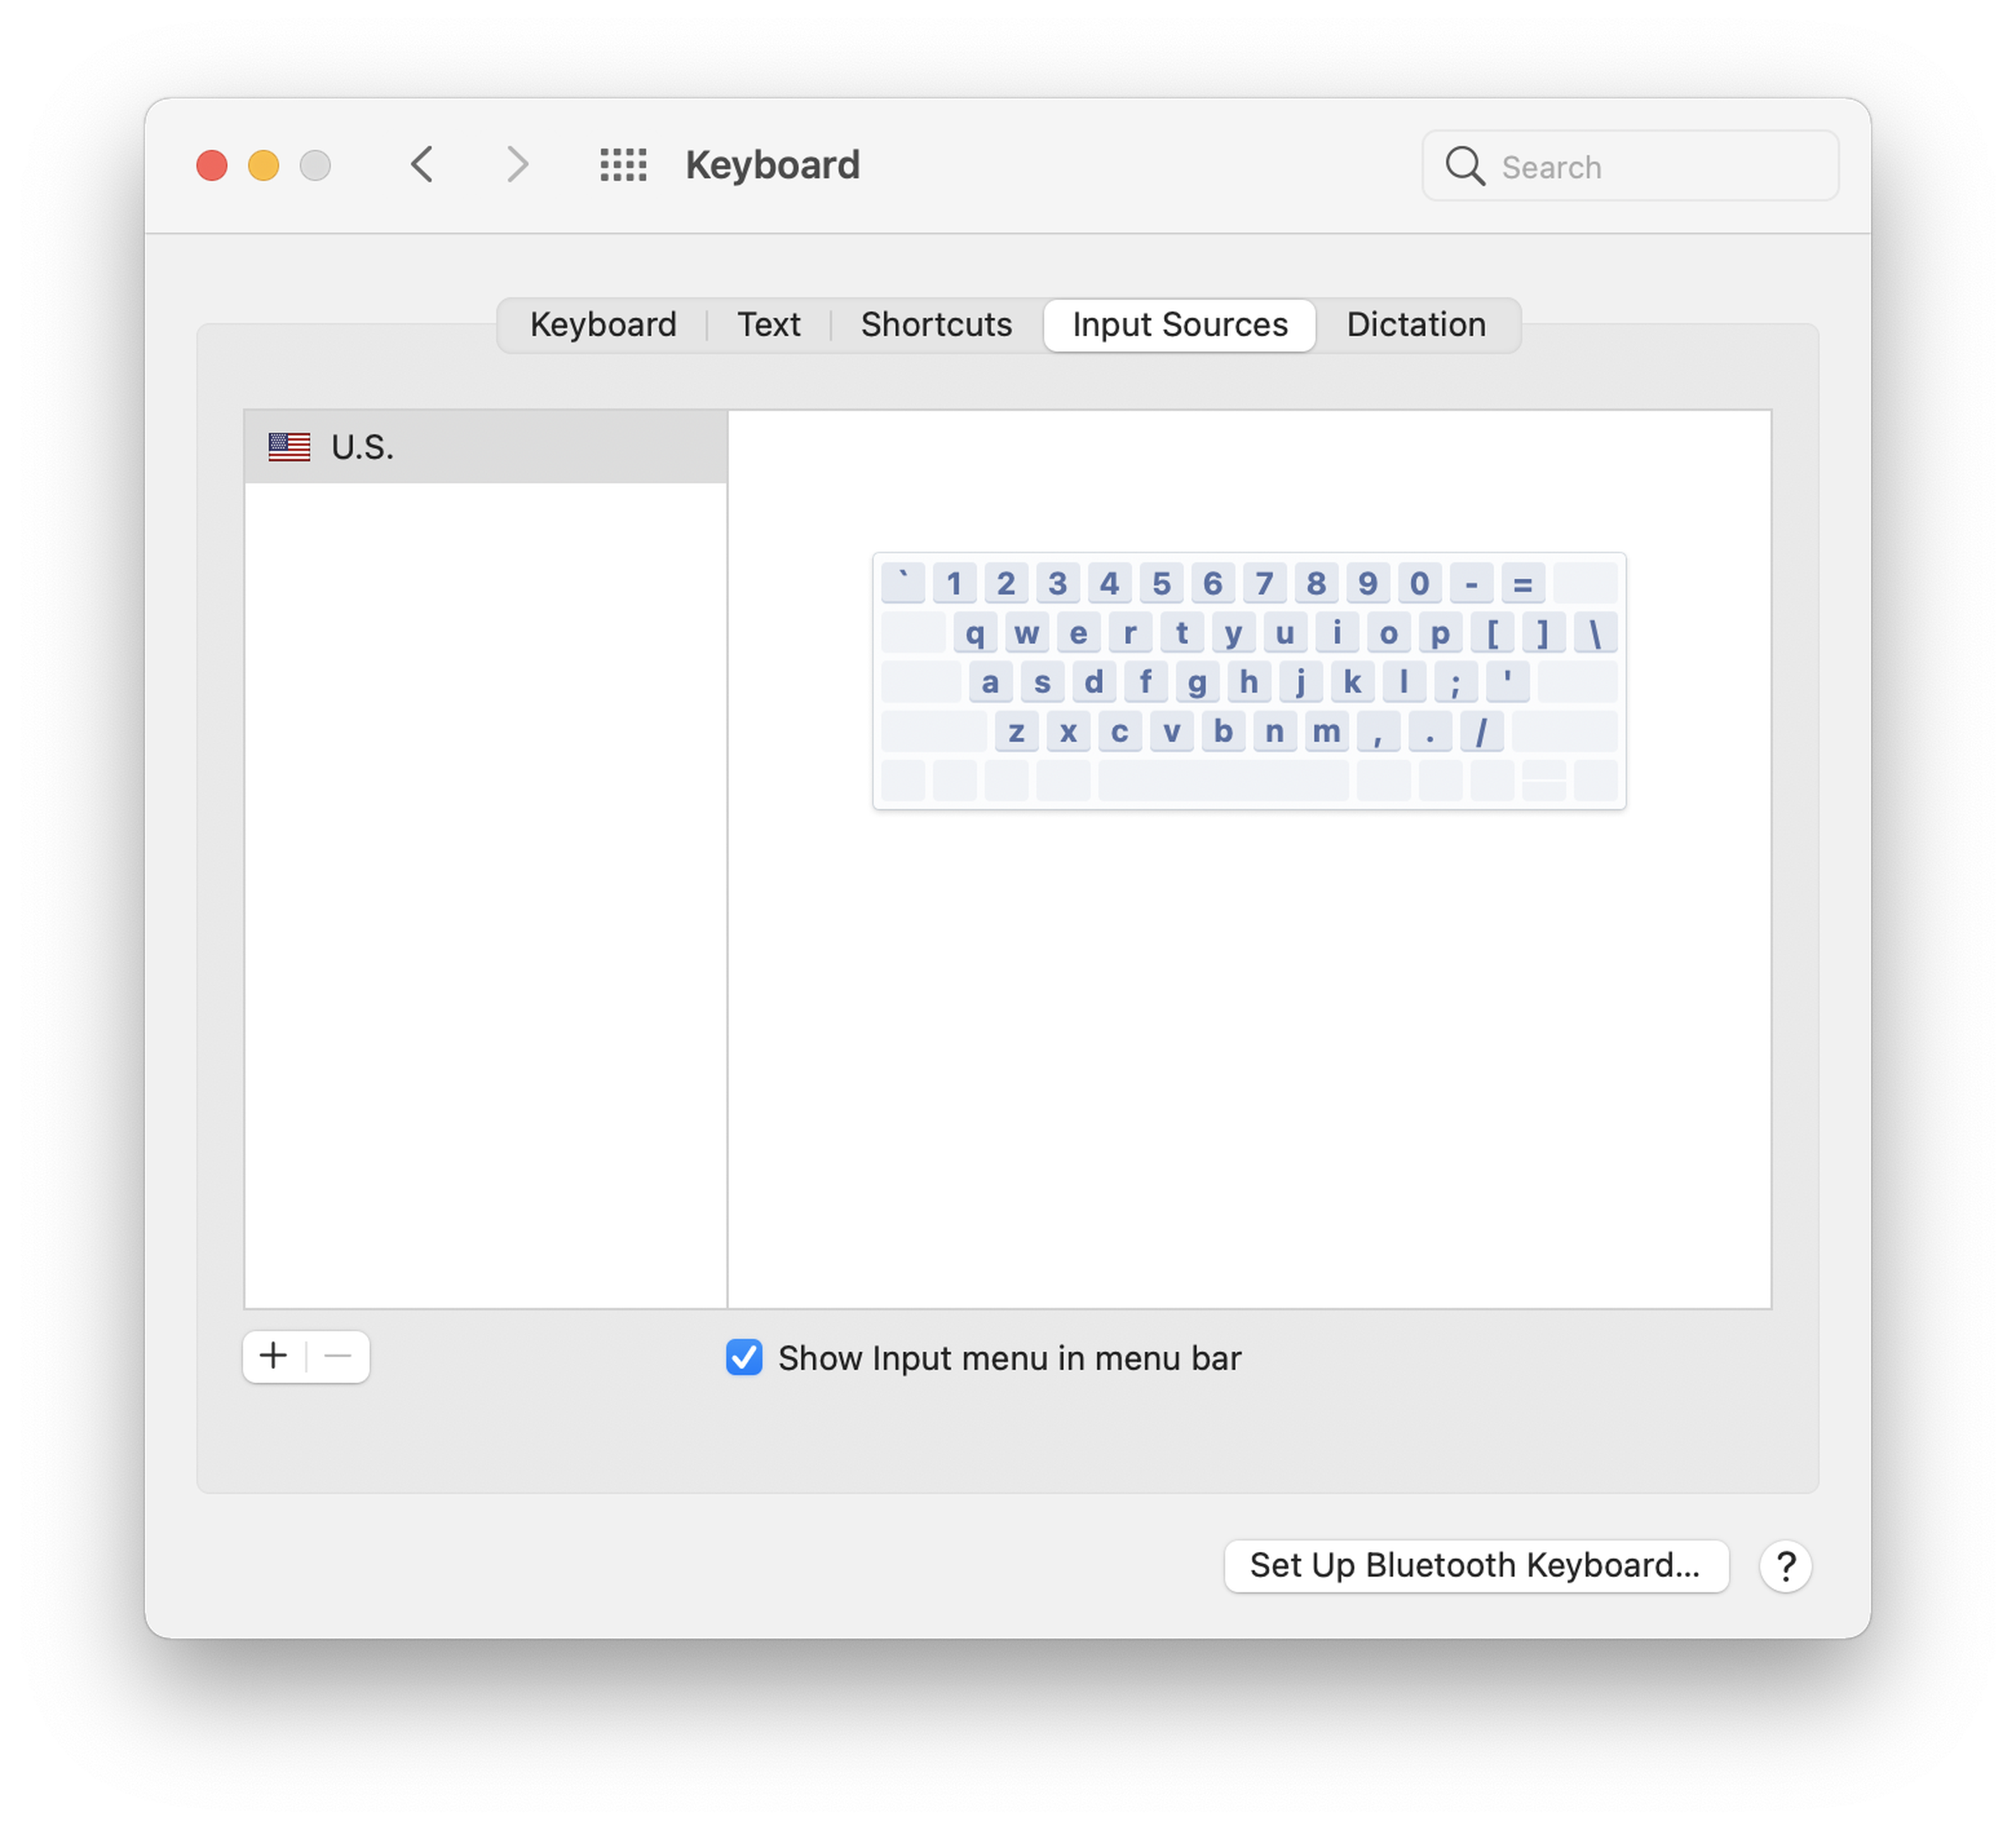 To get the Input Menu icon, you need to enable it in your Keyboard preferences.